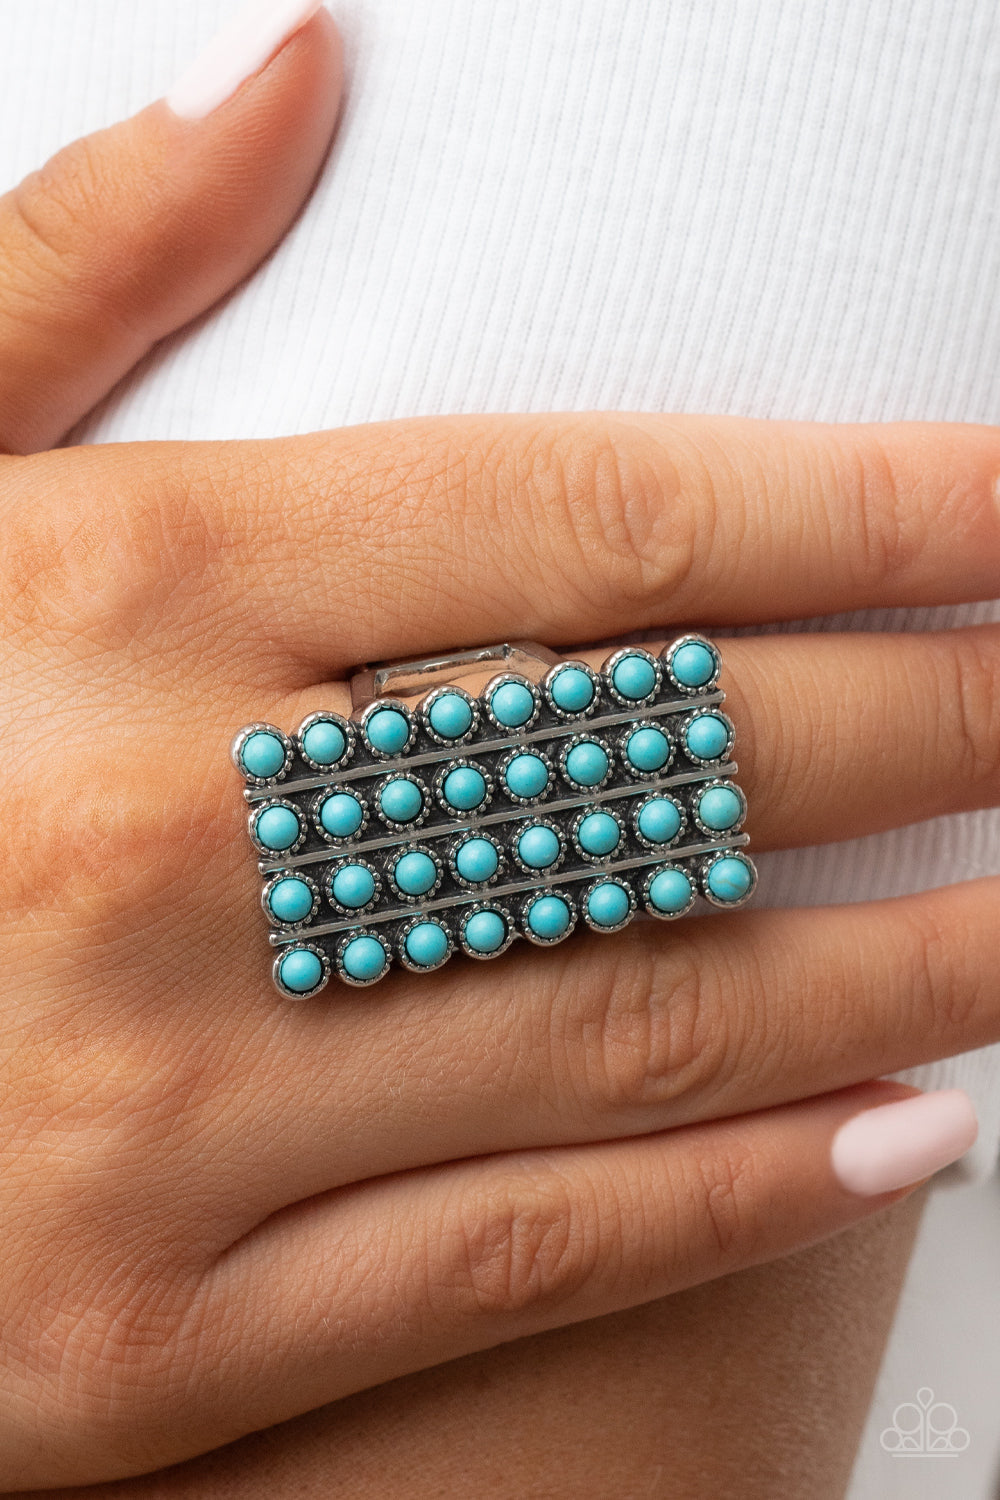 Pack Your SADDLEBAGS - Blue Turquoise Ring - Paparazzi Accessories - Bordered in antiqued silver studs, rows of dainty turquoise stones boldly stack up the finger across the front of an oversized rectangular silver frame for an earthy vibe atop the finger.